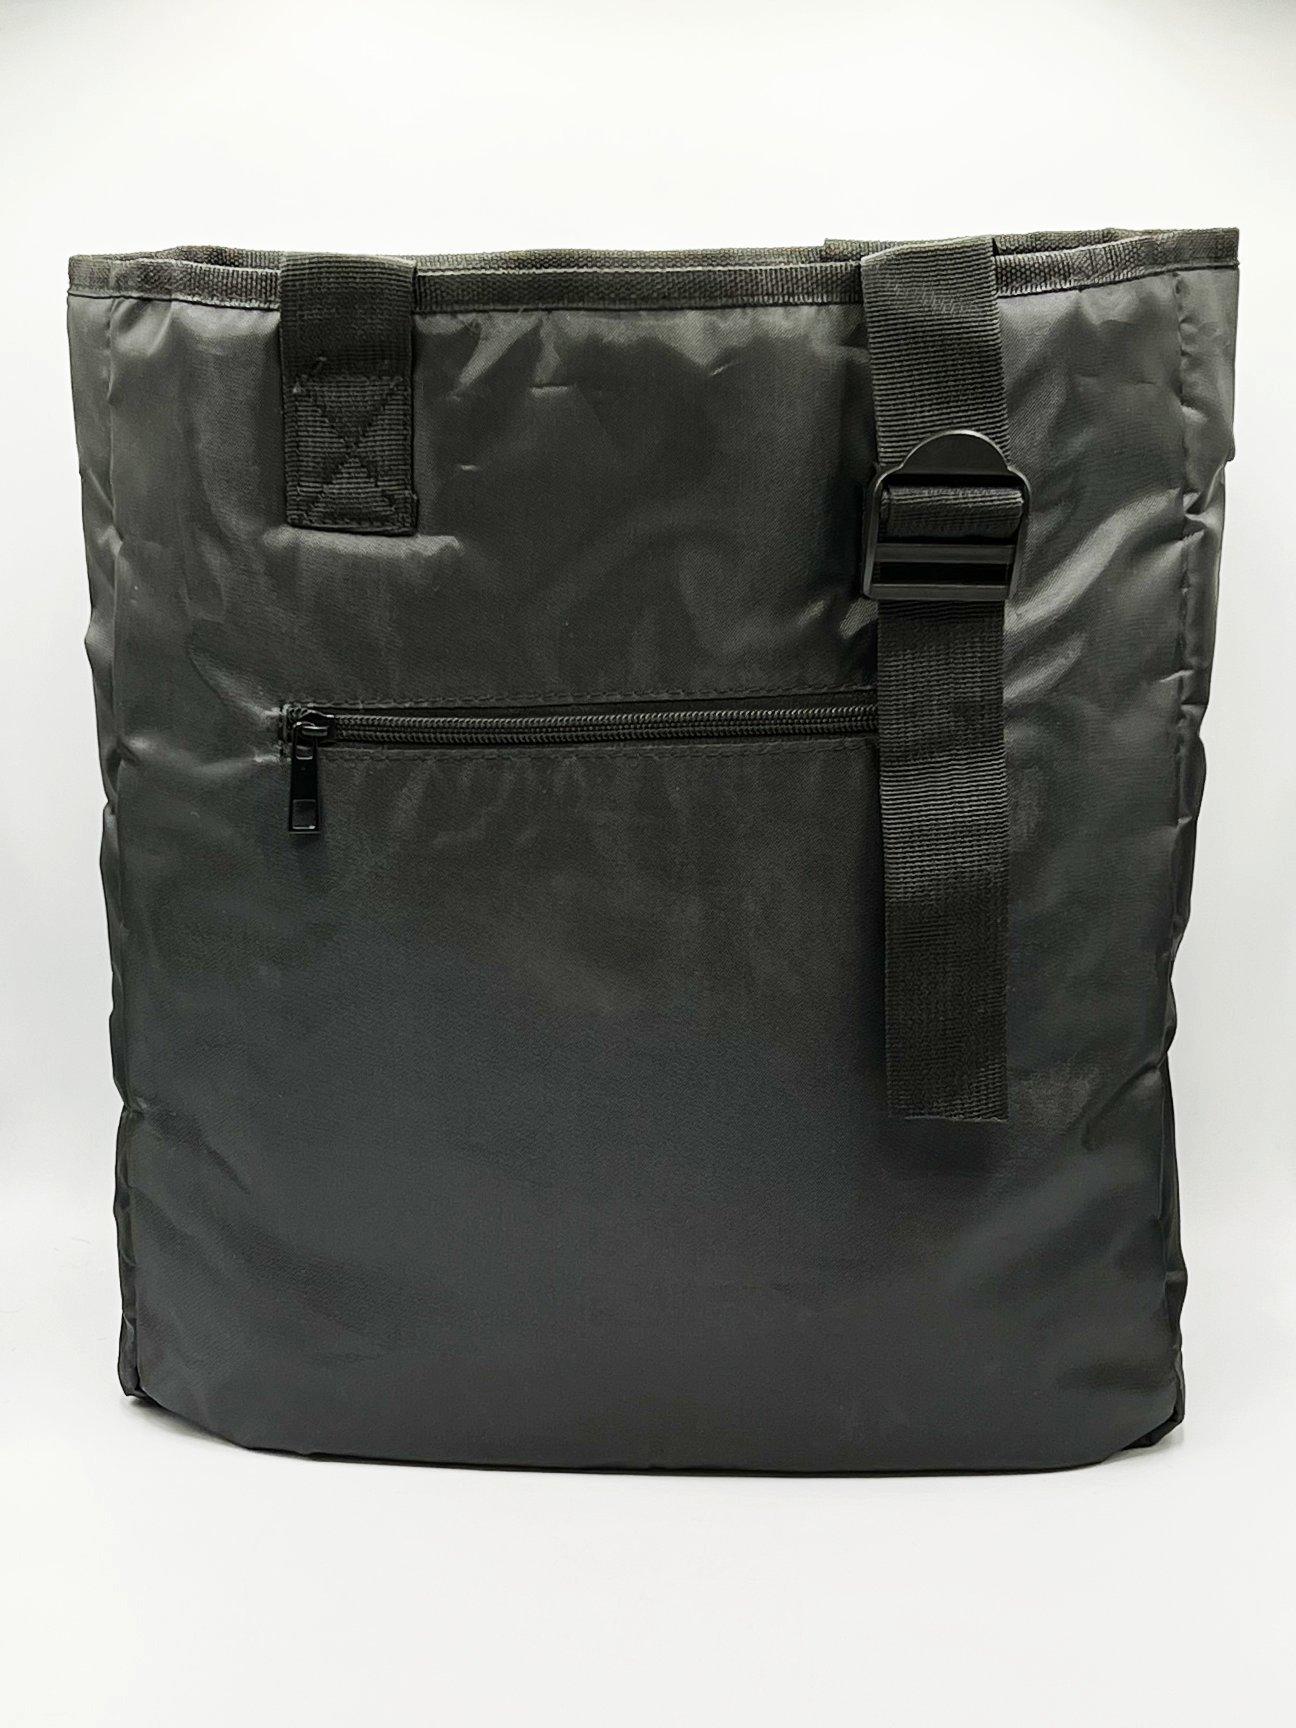 Nylon tote bag with zip front pocket